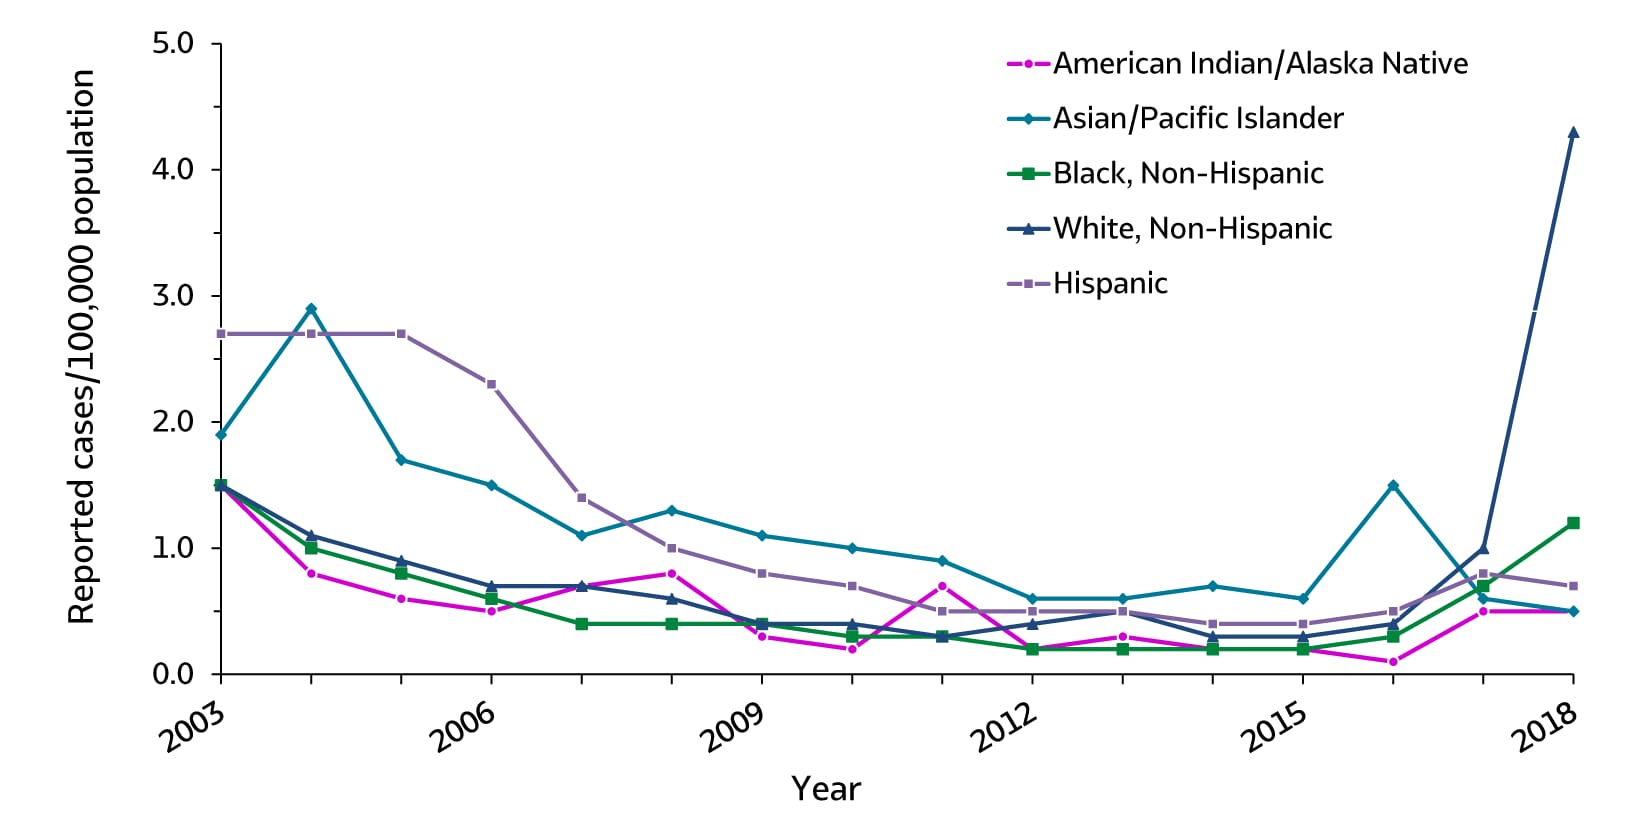 Figure 1.6.  The line graph shows rates of reported hepatitis A by race/ethnicity for 2003 through 2018. The race/ethnicity classifications are American Indian/Alaska Native, Asian/Pacific Islander, Black non-Hispanic, White non-Hispanic, and Hispanic. Rates for White, non-Hispanic and Black, non-Hispanic increased in 2018.  The largest increase was for White, non-Hispanics (330% increase).  Rates for American Indian/Alaska Natives remained constant and rates for Asian/Pacific Islanders and Hispanics decreased.